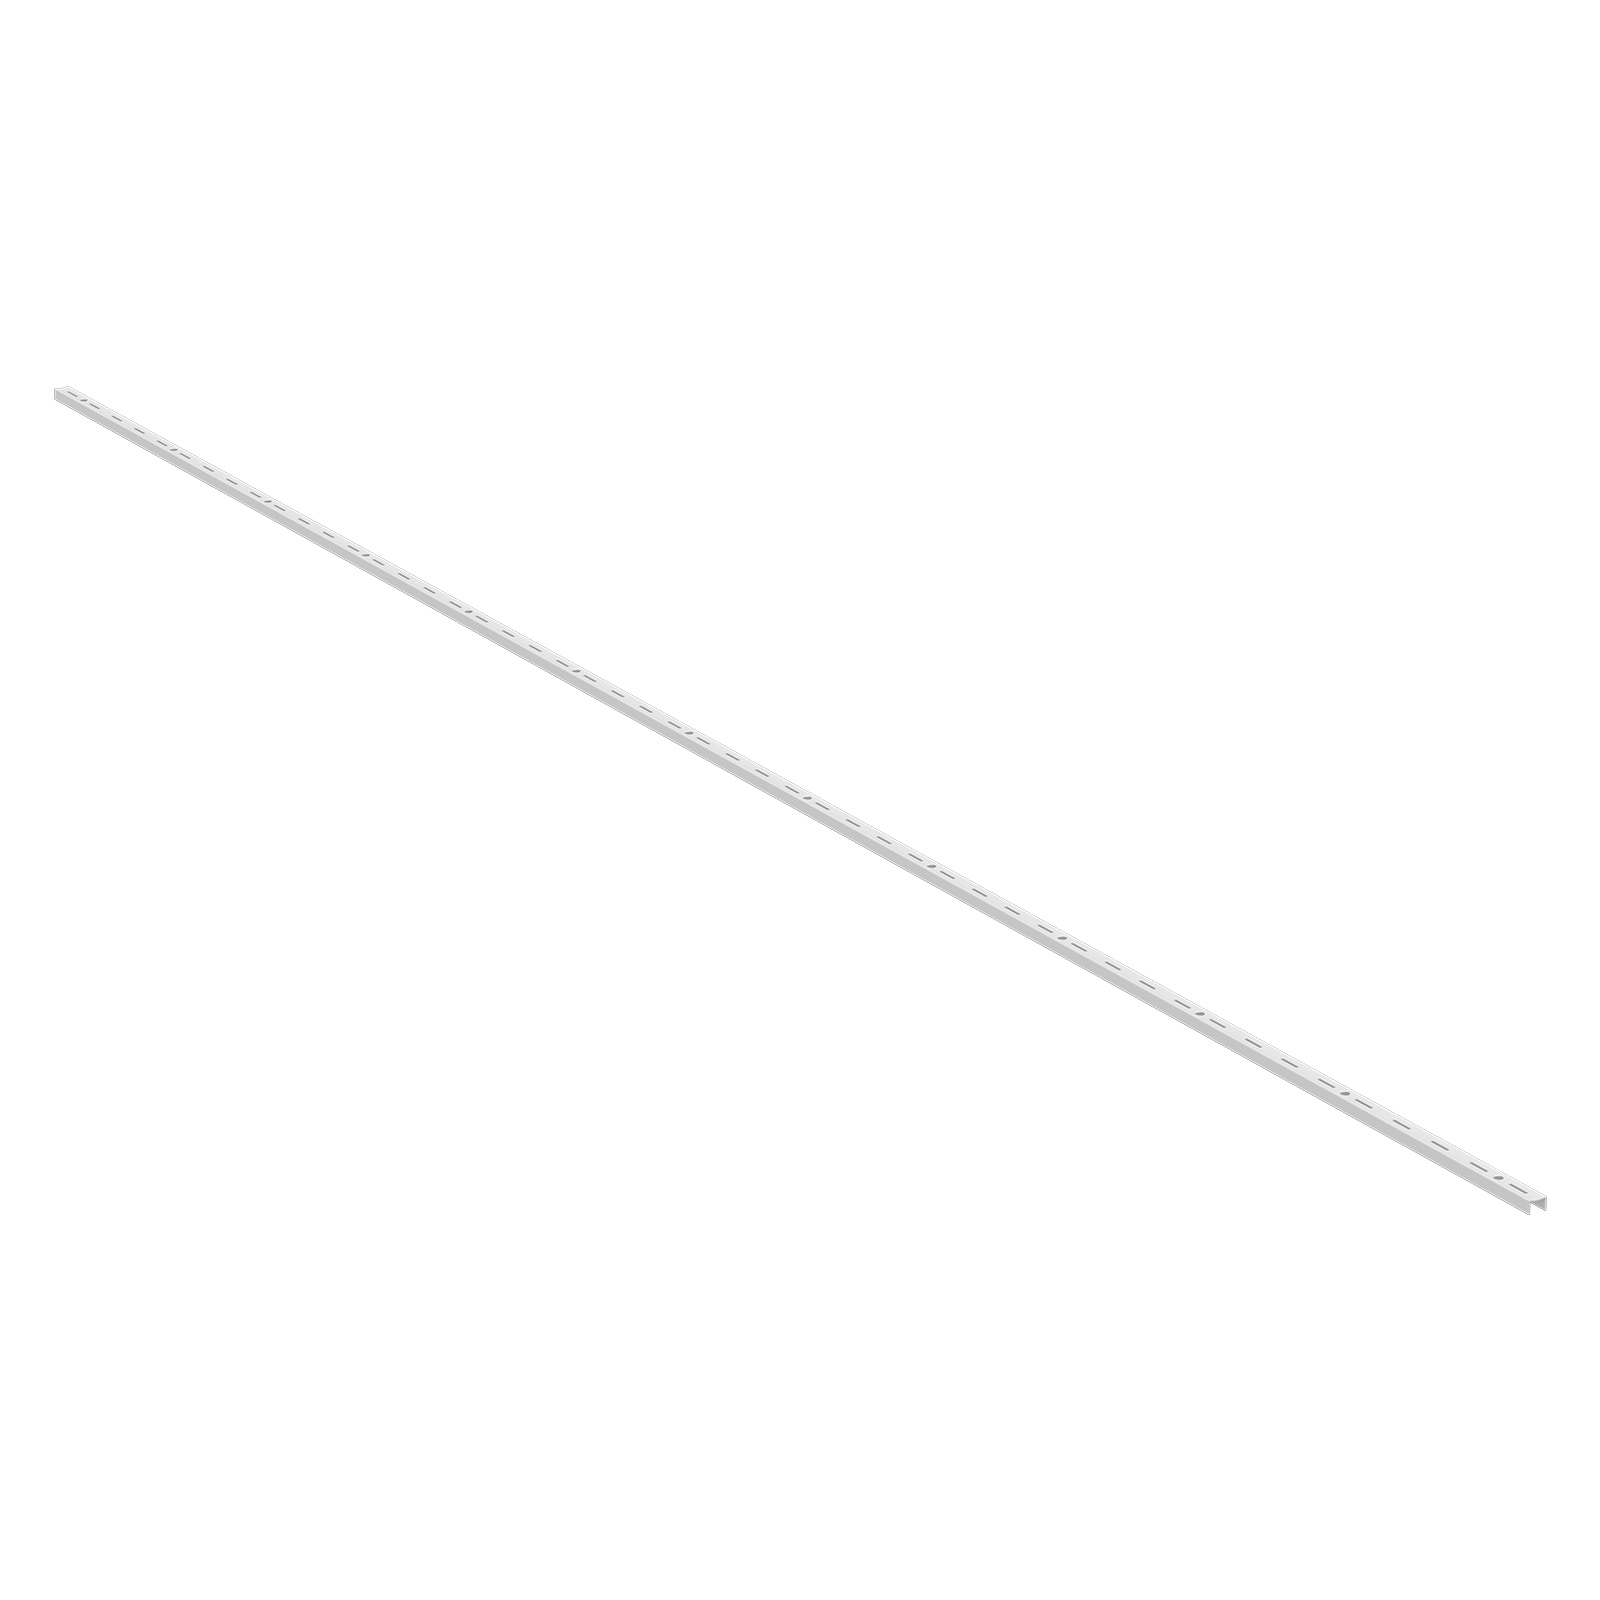 Home Solutions Single Slot Wall Strip White 2500mm